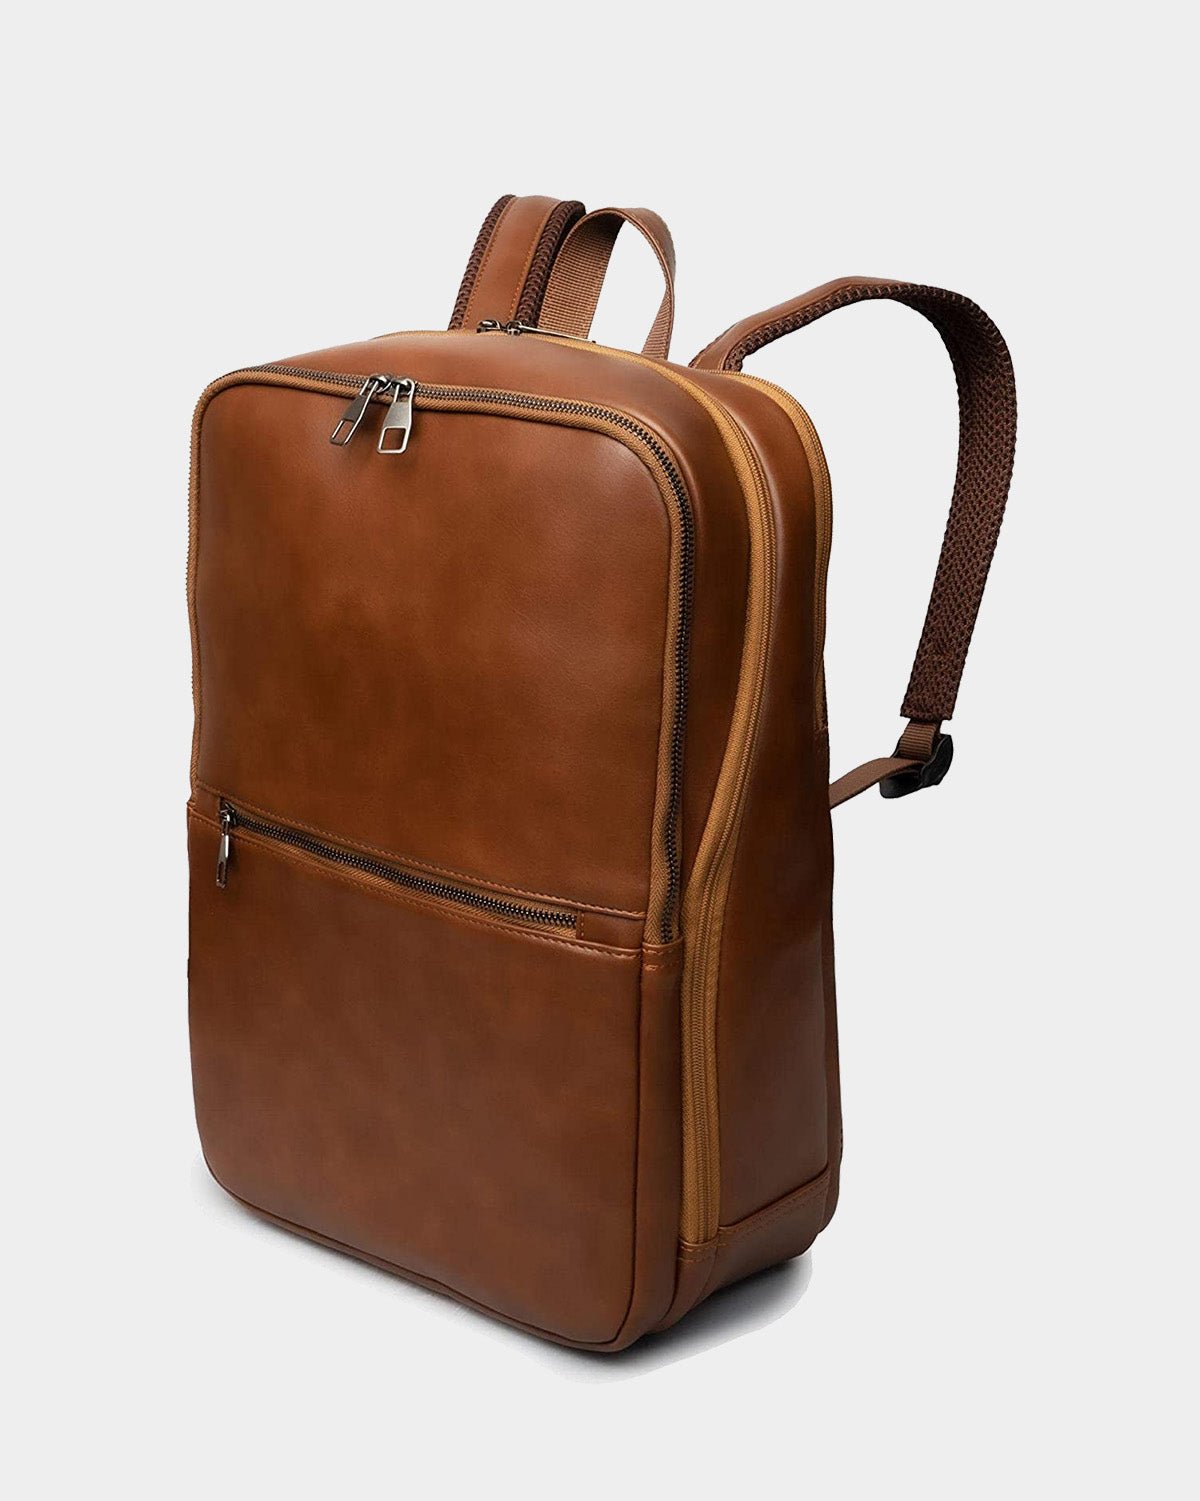 Laptop Backpack, Full Leather, 3 Color Options  99percenthandmade   